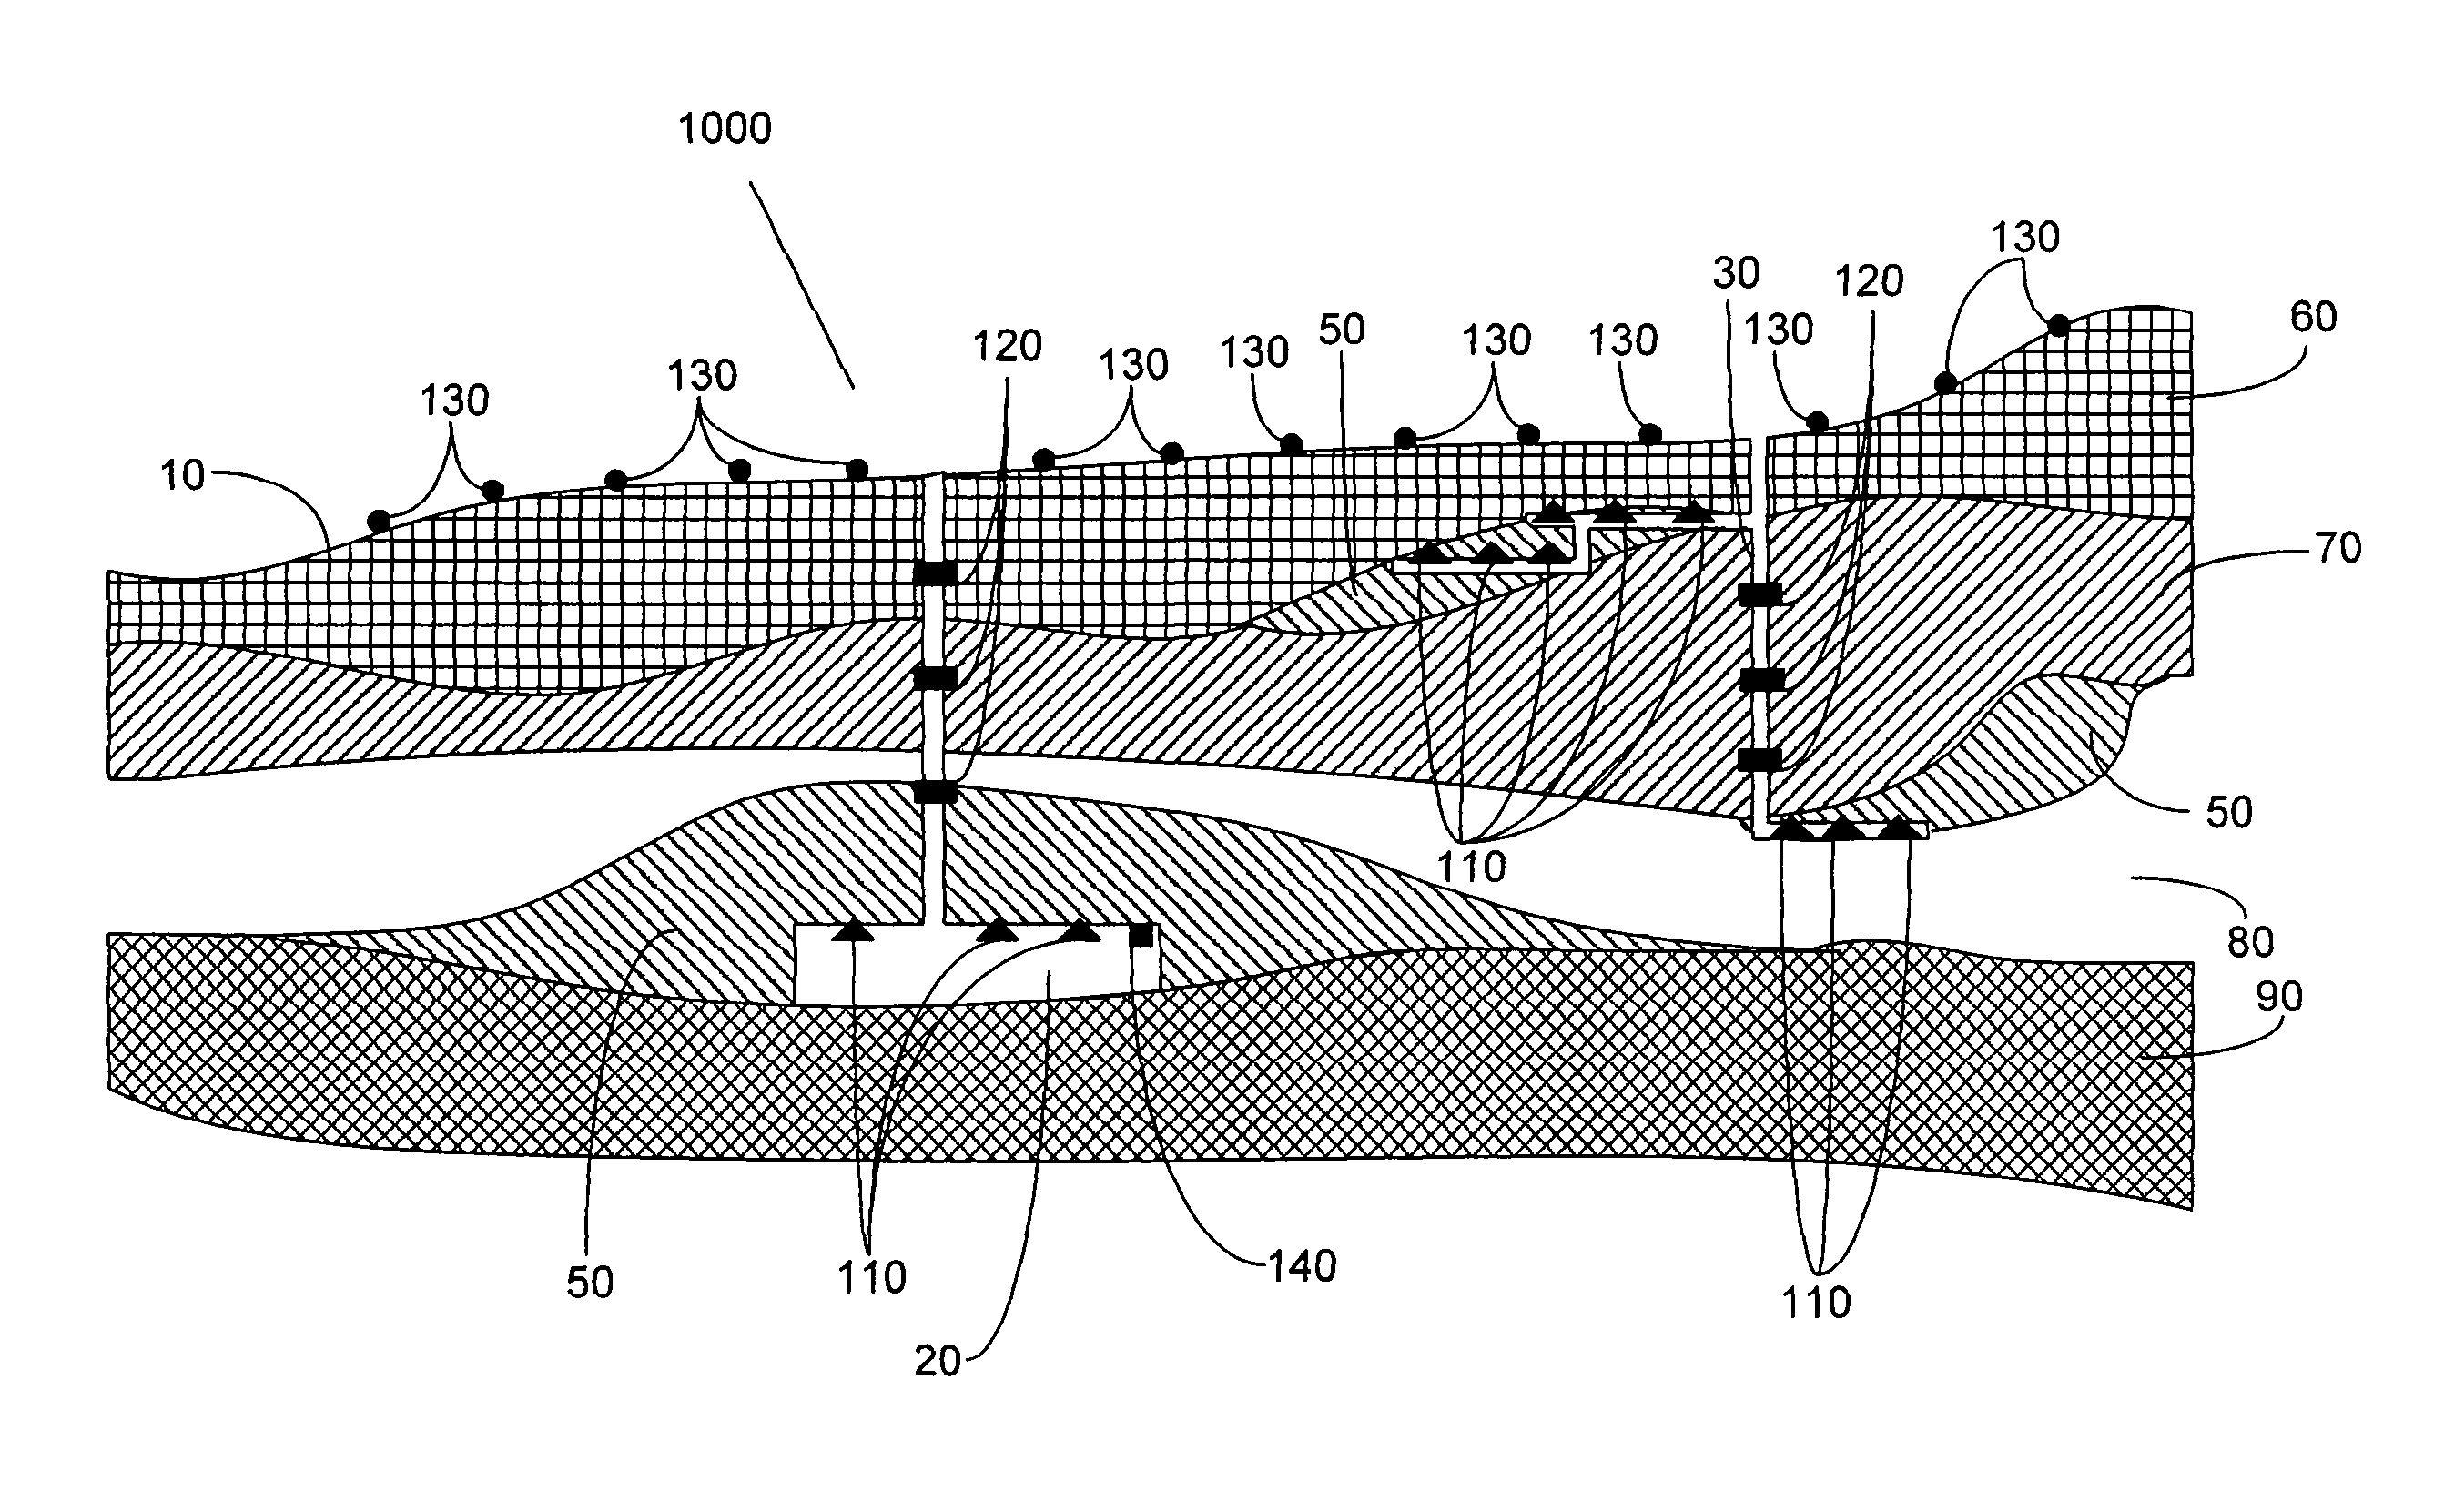 Method to aid in the exploration, mine design, evaluation and/or extraction of metalliferous mineral and/or diamond deposits